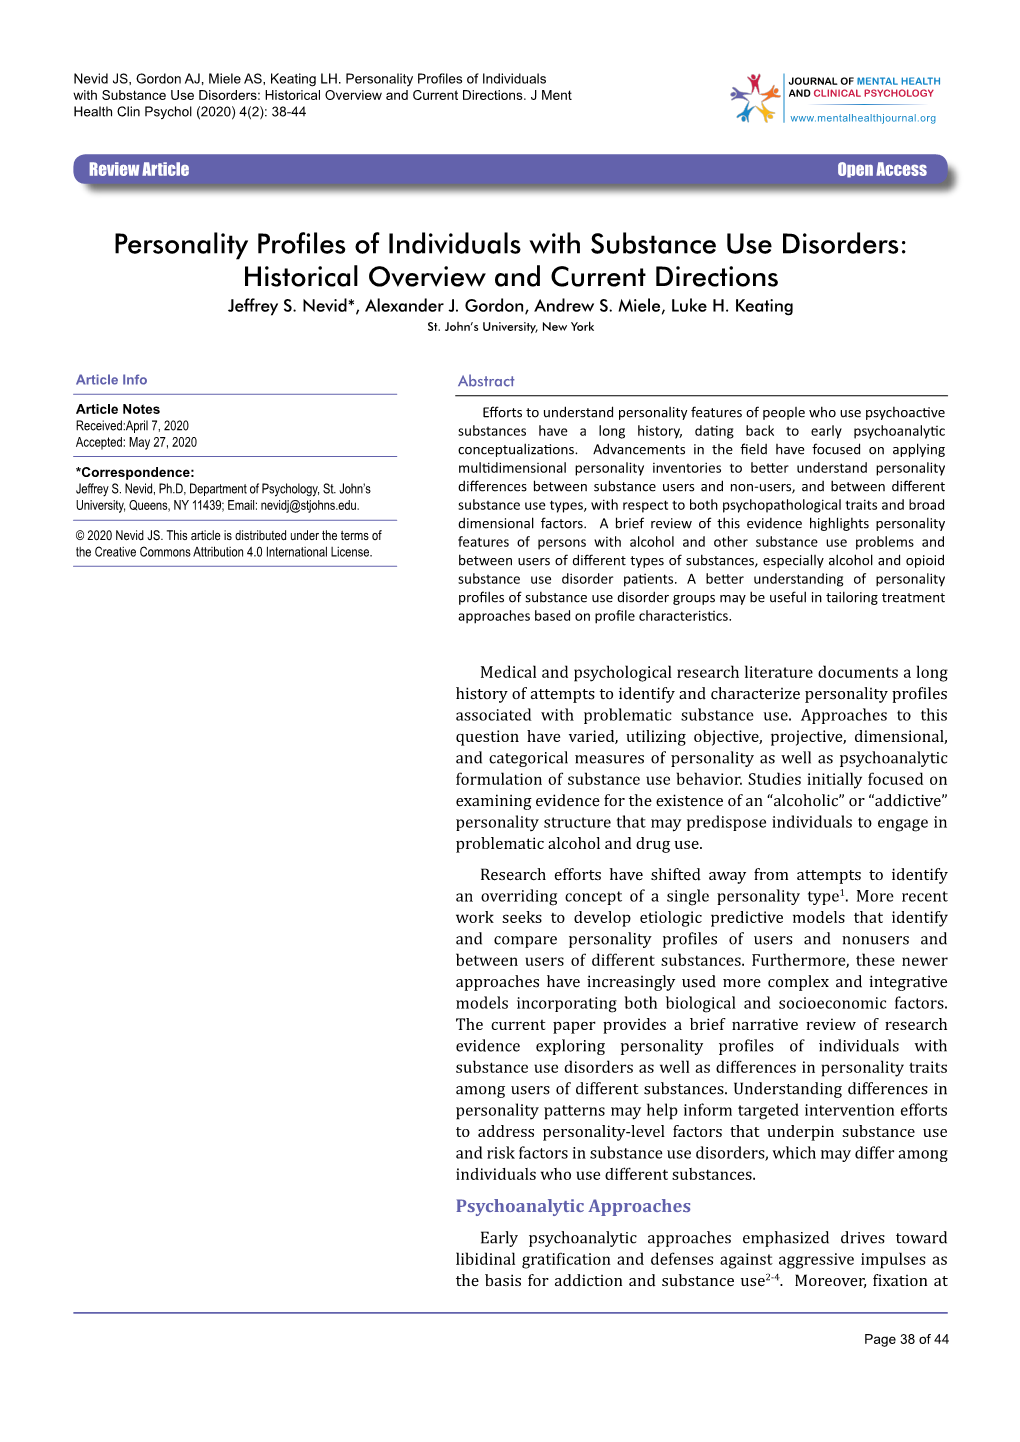 Personality Profiles of Individuals with Substance Use Disorders: Historical Overview and Current Directions Jeffrey S